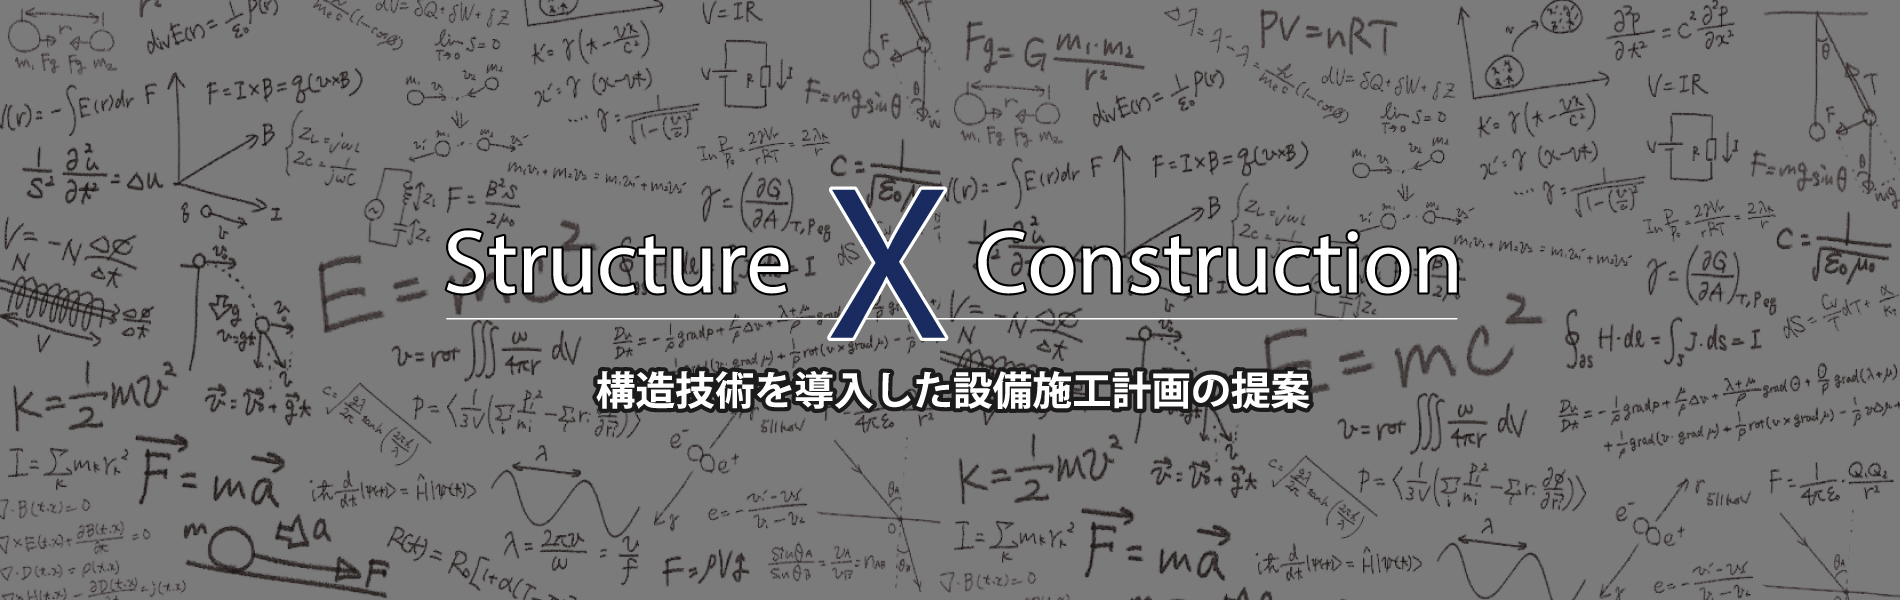 Structure X Construction　構造技術を導入した設備施工計画の提案